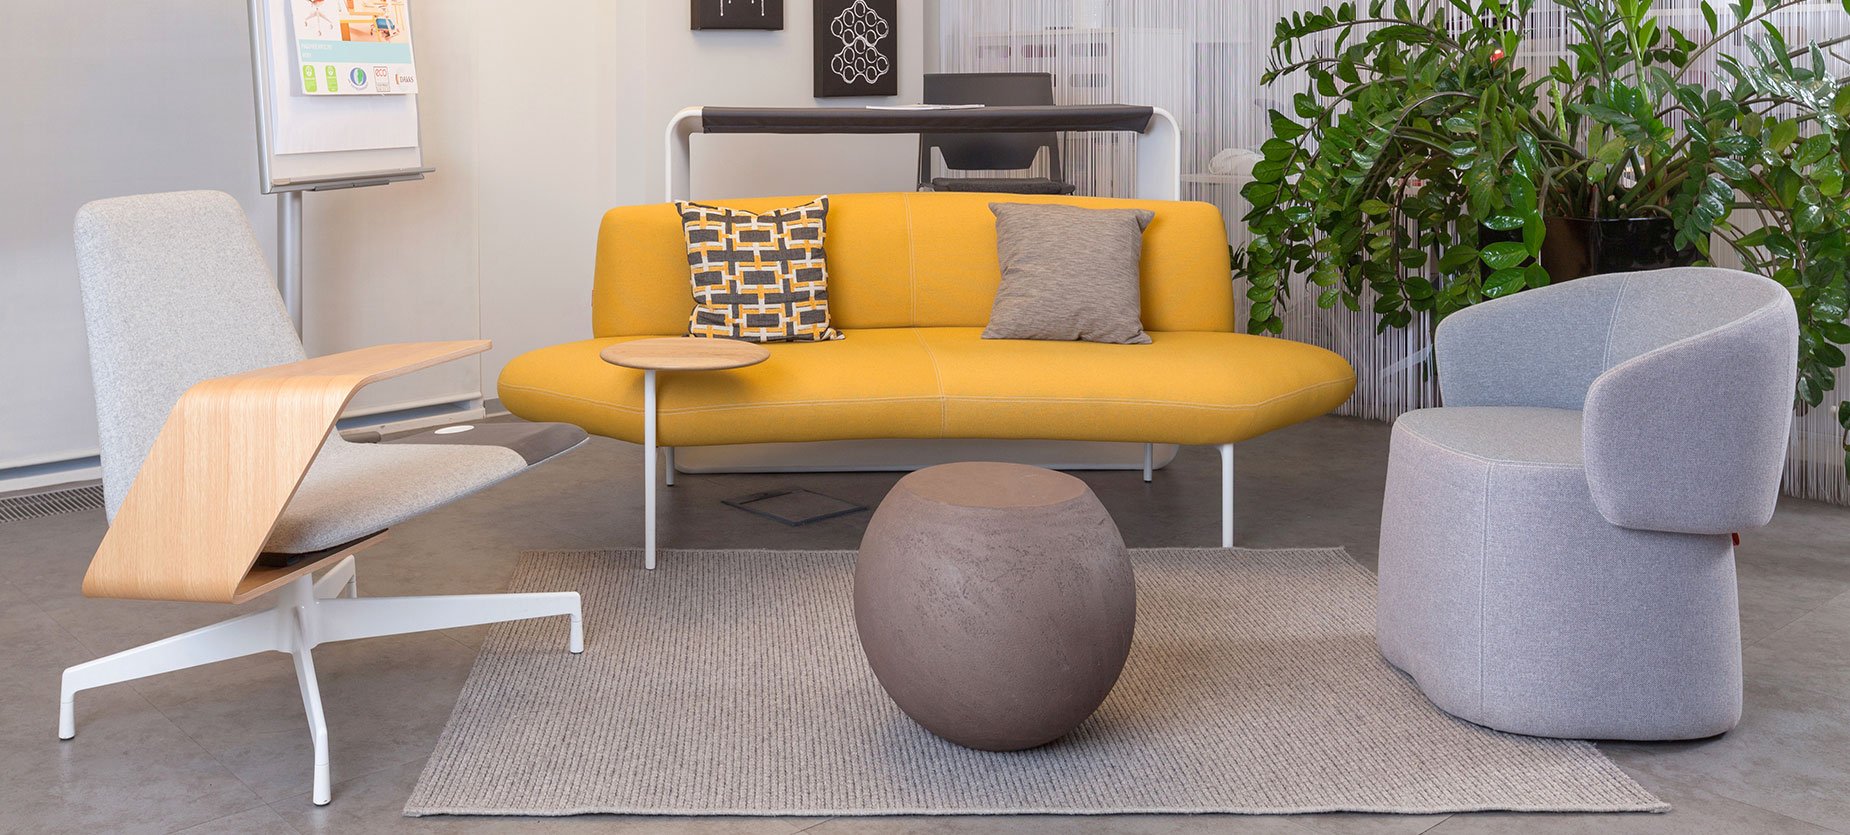 A cozy lounge area is furnished with an inviting combination of a Chick pouf, Feather sofa, Harbor Work Lounge, and Cappellini's Bong coffee table. 

By simply moving the flip board to the opposite wall and adding a few guest chairs, this area easily transforms into a training zone.